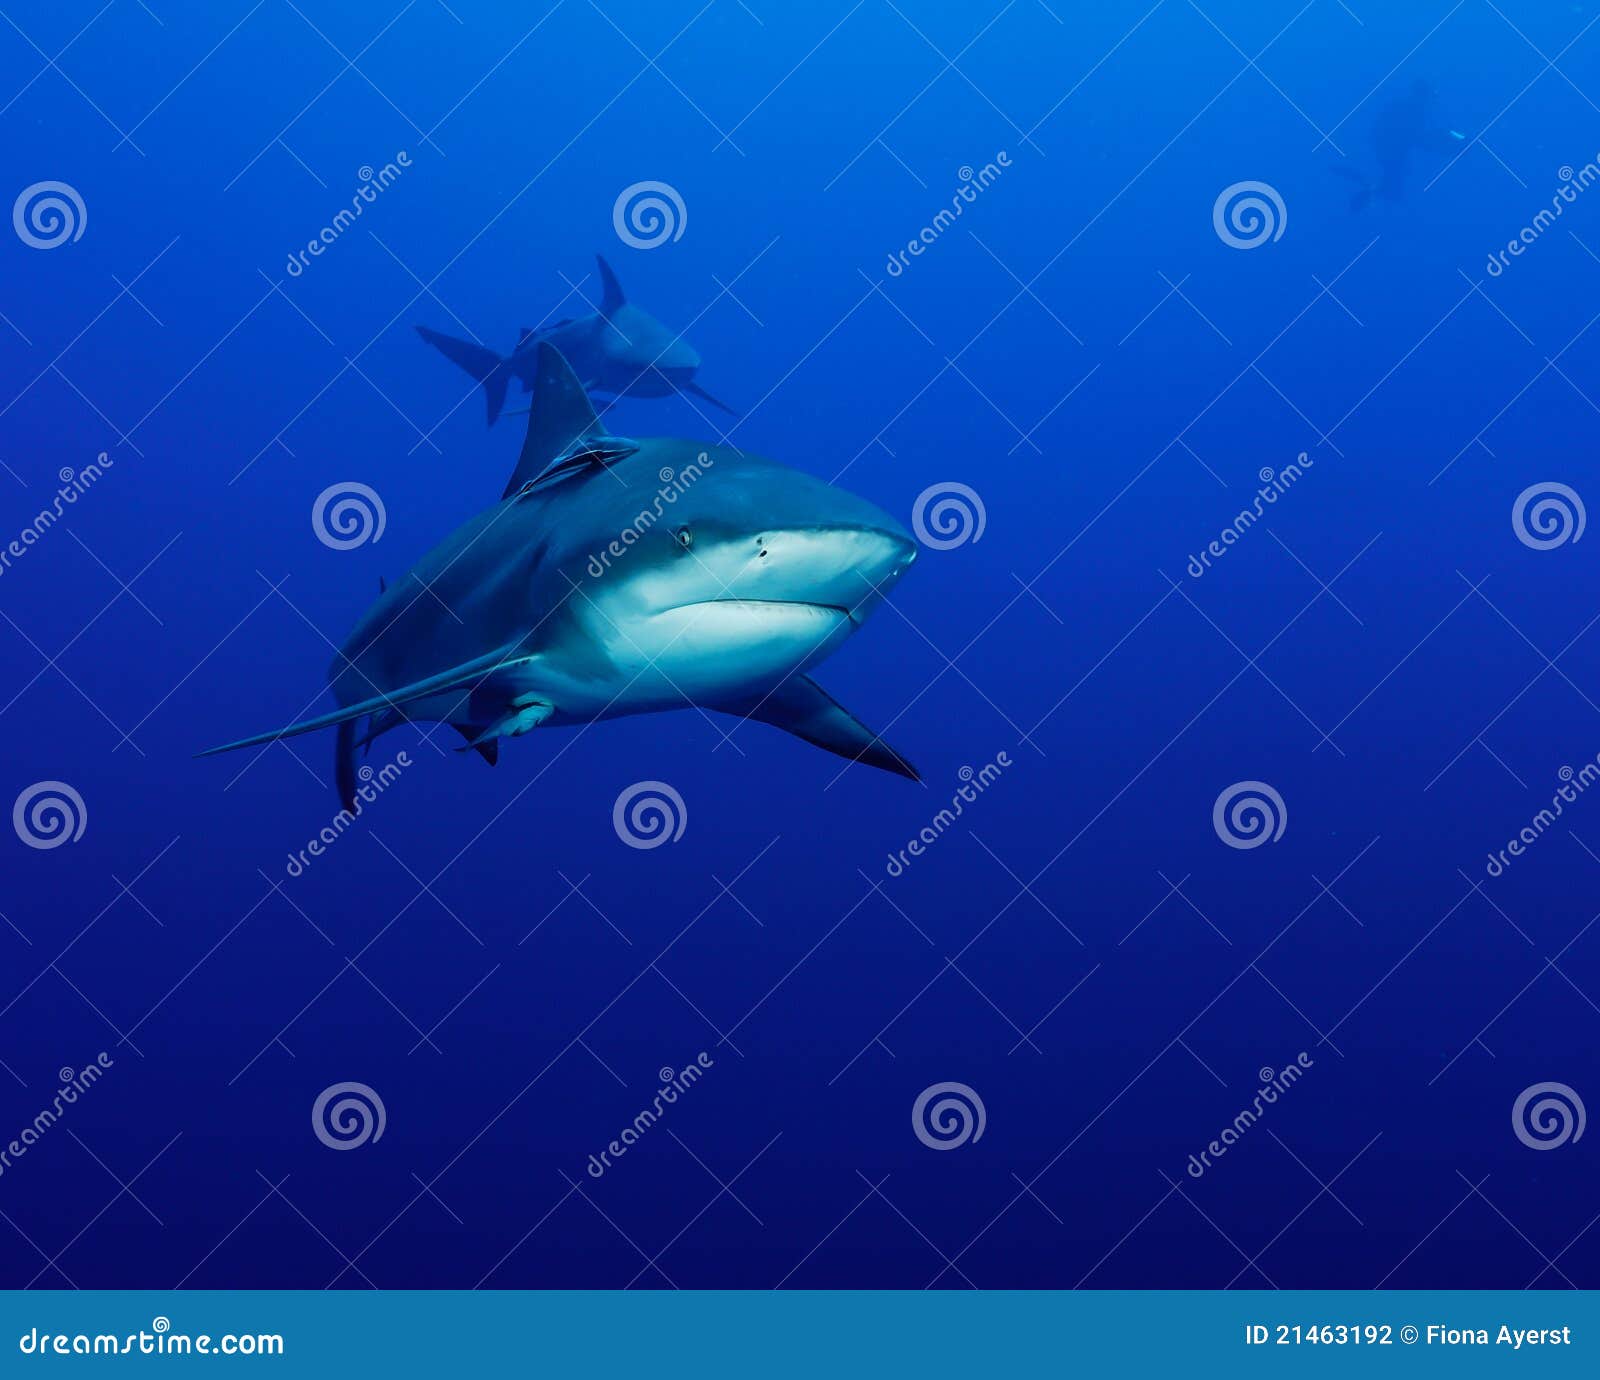 Shark approach stock photo. Image of shots, underwater - 21463192